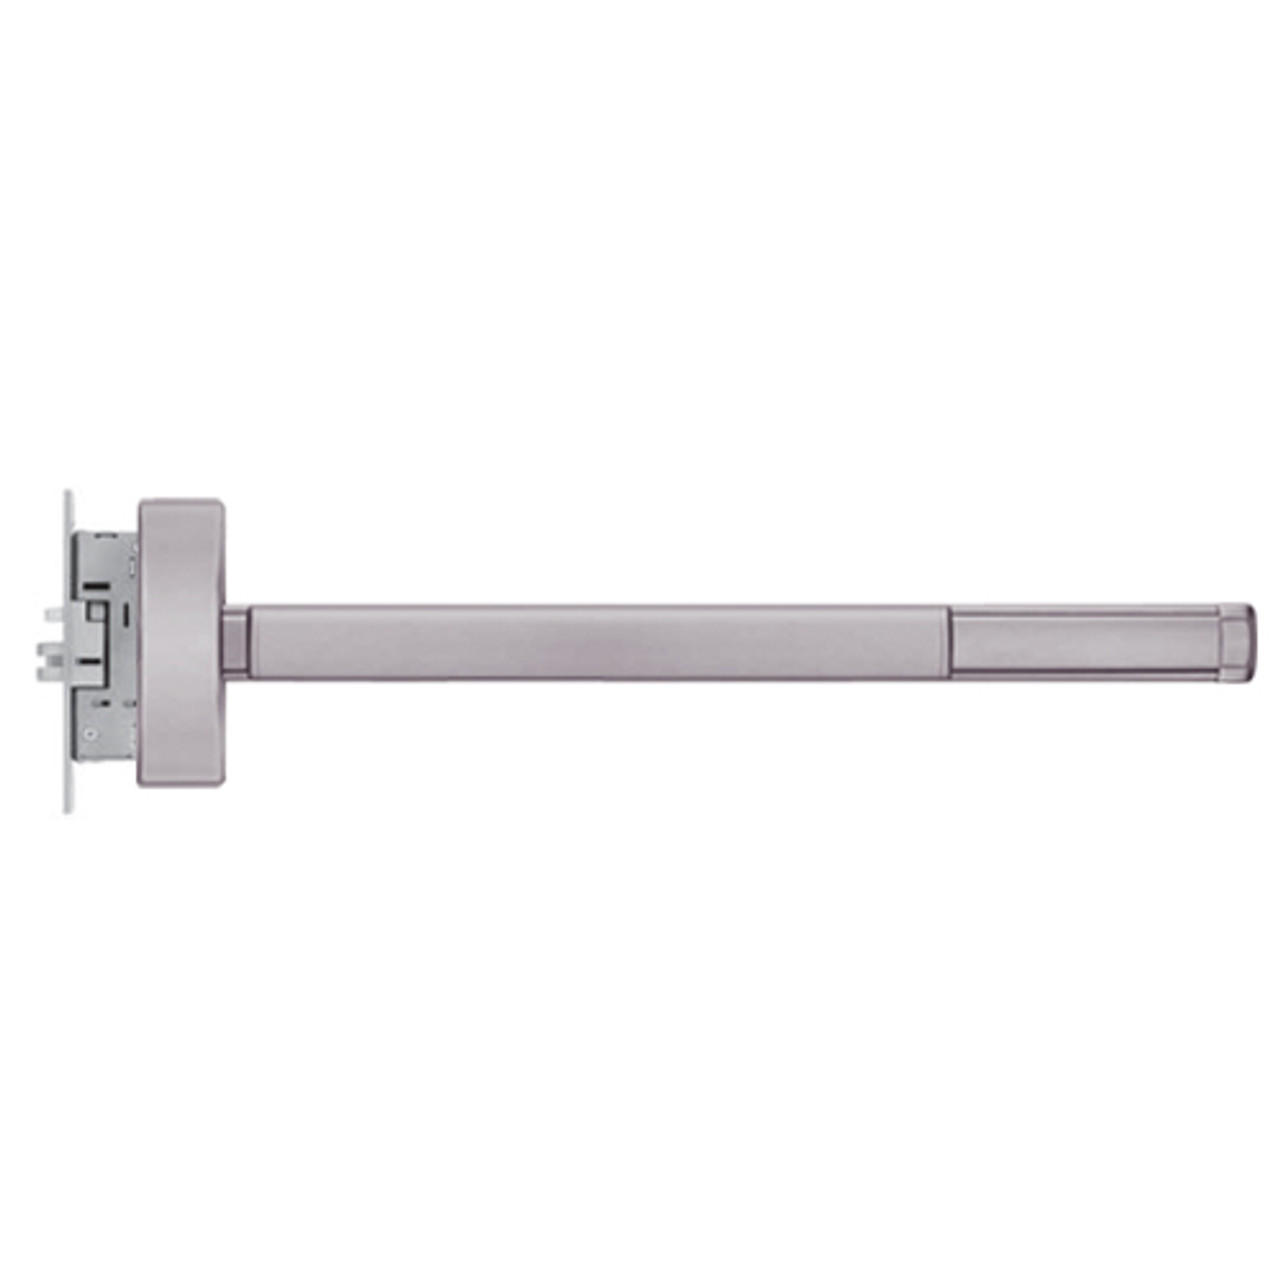 MLR2315-LHR-630-36 PHI 2300 Series Apex Mortise Exit Device with Motorized Latch Retraction Prepped for Thumb Piece Always Active in Satin Stainless Steel Finish